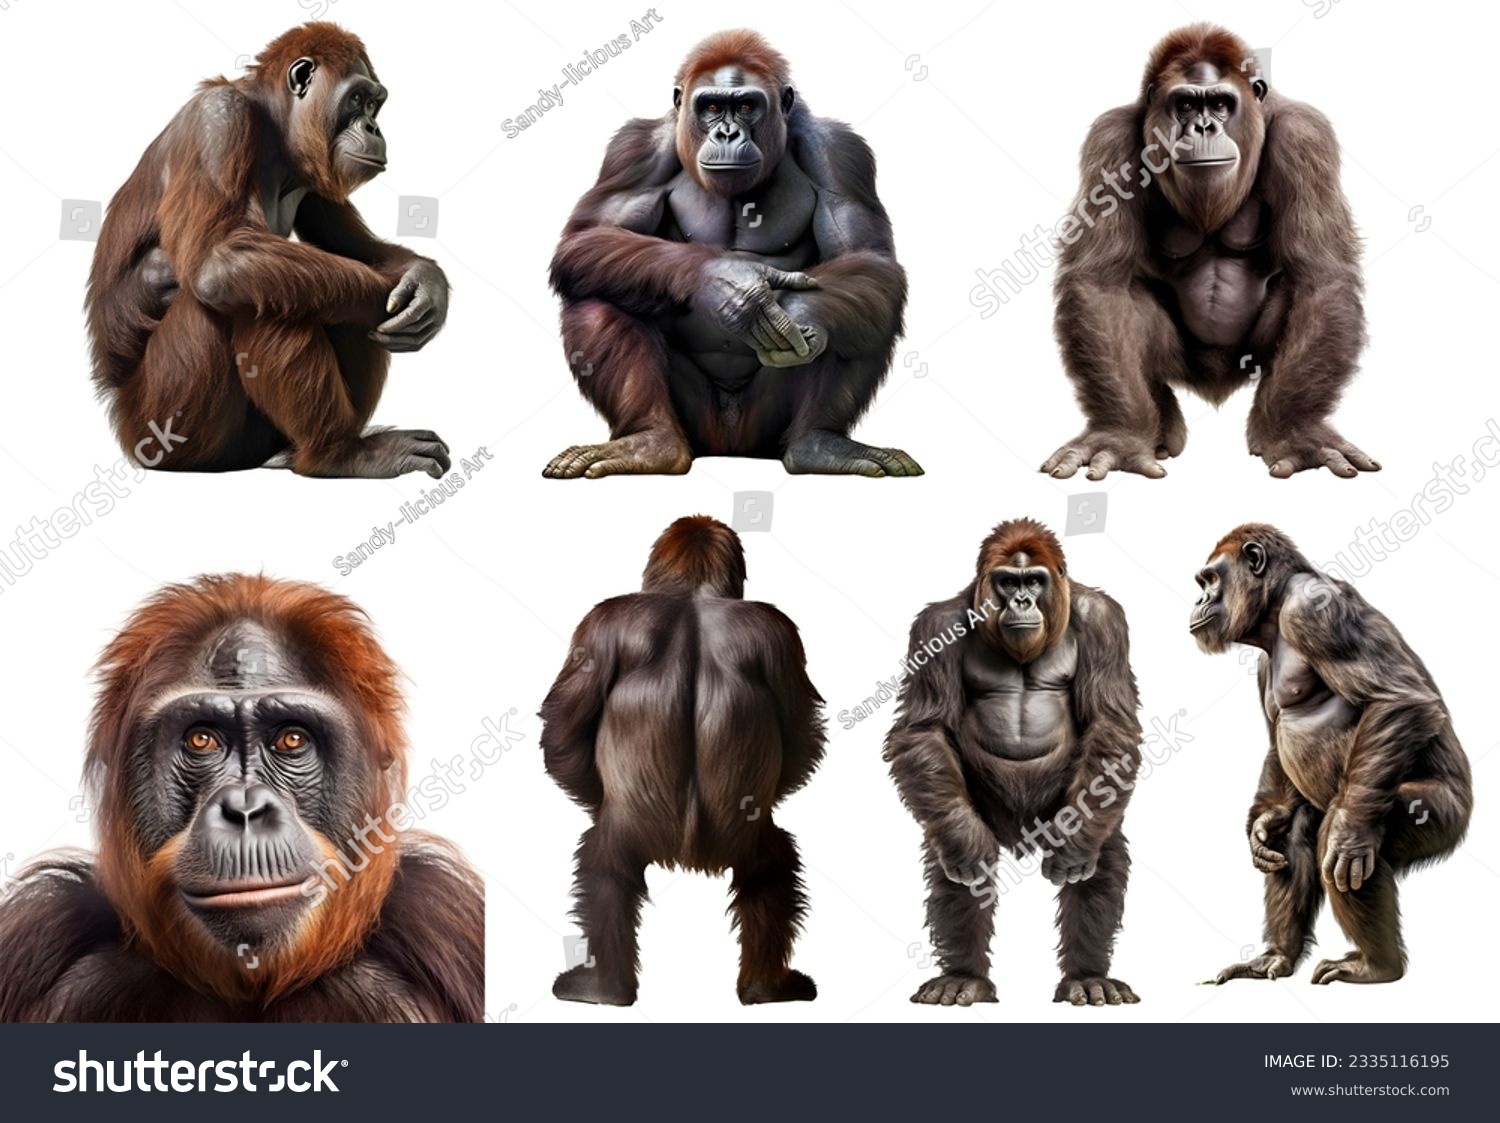 ape, many angles and view portrait side back head shot isolated on white background cutout #2335116195